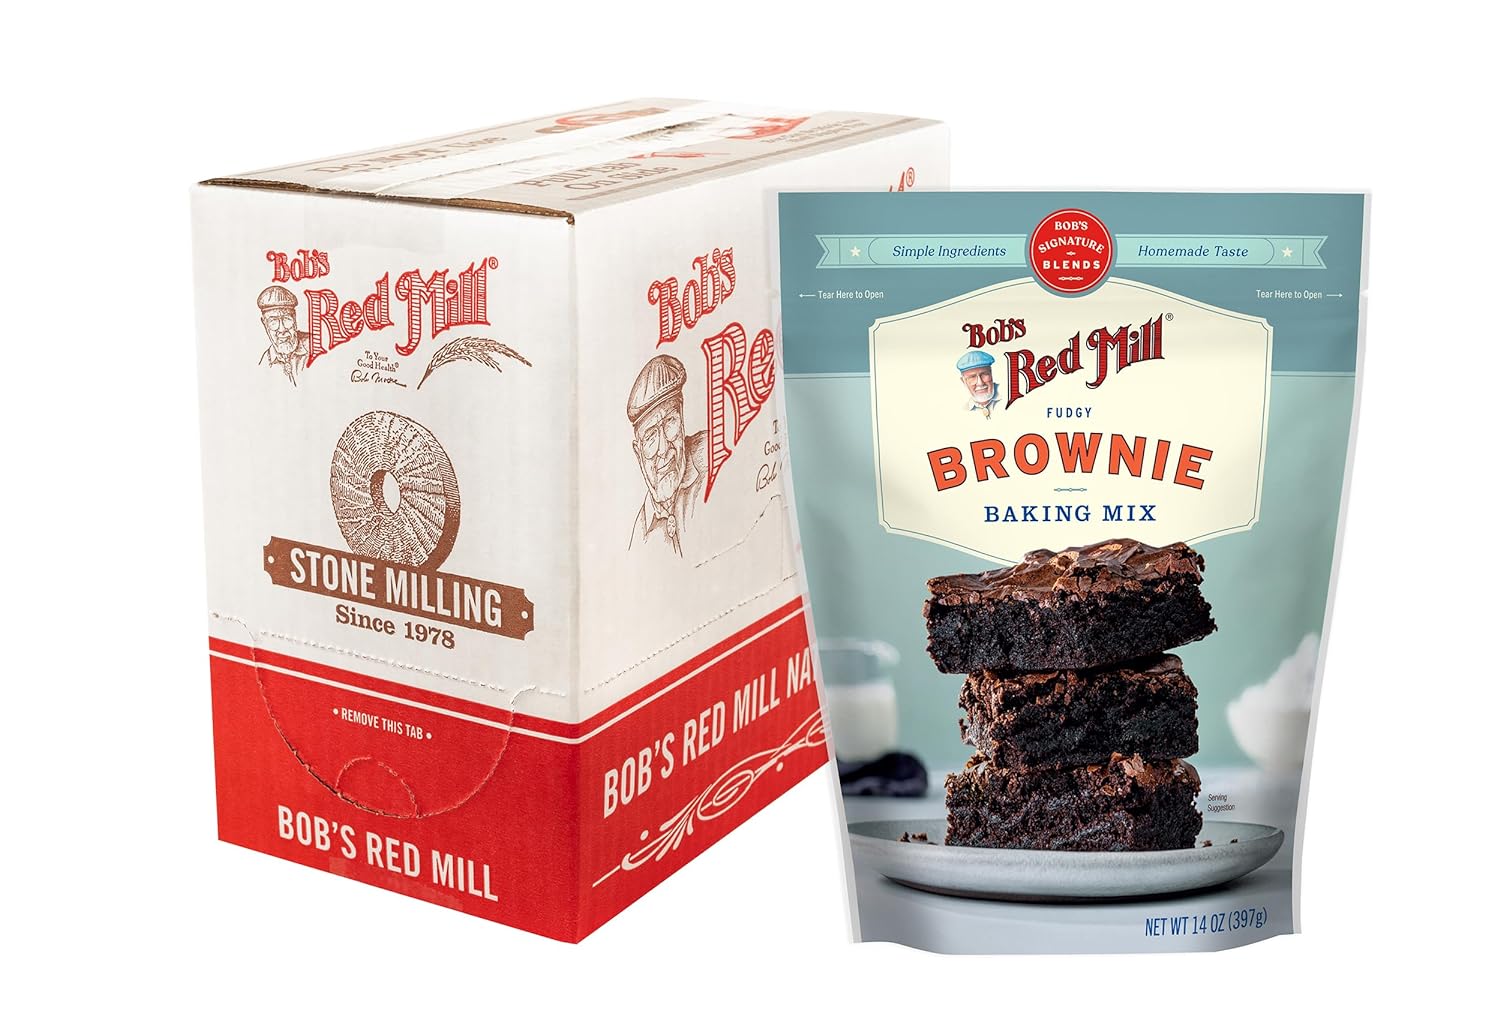 Bob's Red Mill Signature Fudgy Brownie Baking Mix - 14 oz Bag (Pack of 4), Simple Clean Ingredients, Homemade Taste, Non-GMO